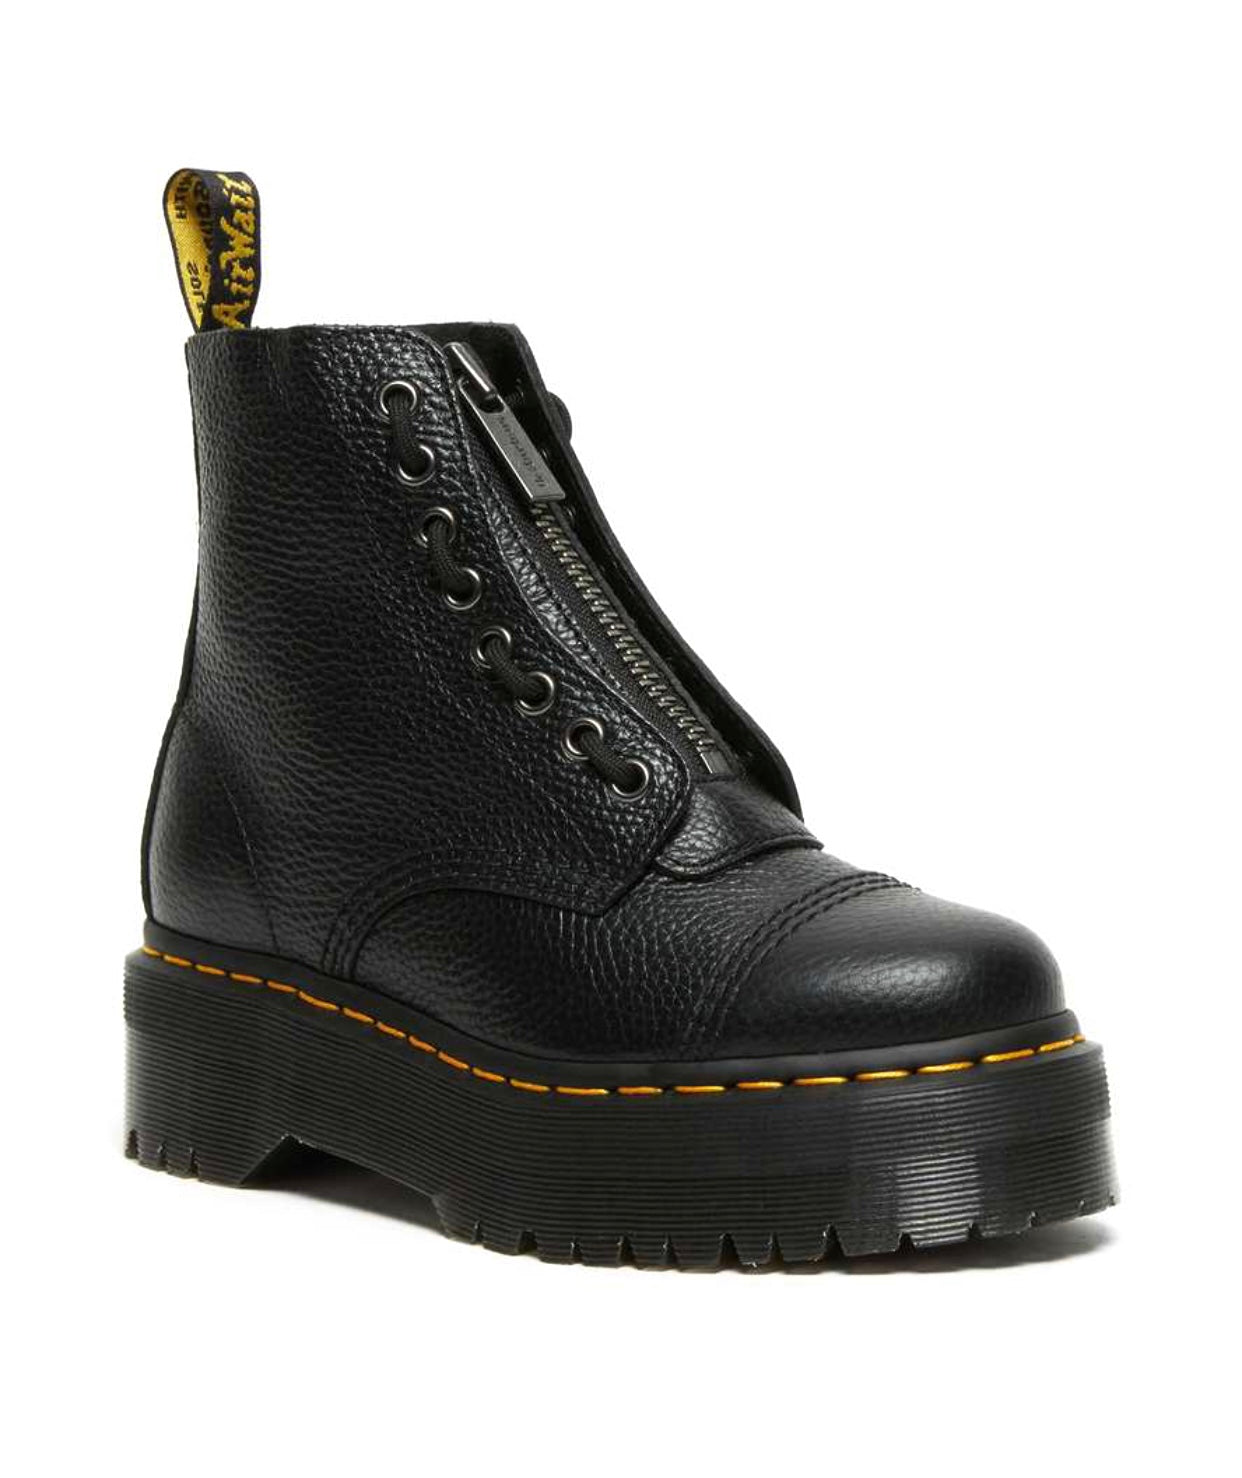 Dr. Martens Sinclair Black Milled Nappa Zip Ankle 8 Eyelet Boot